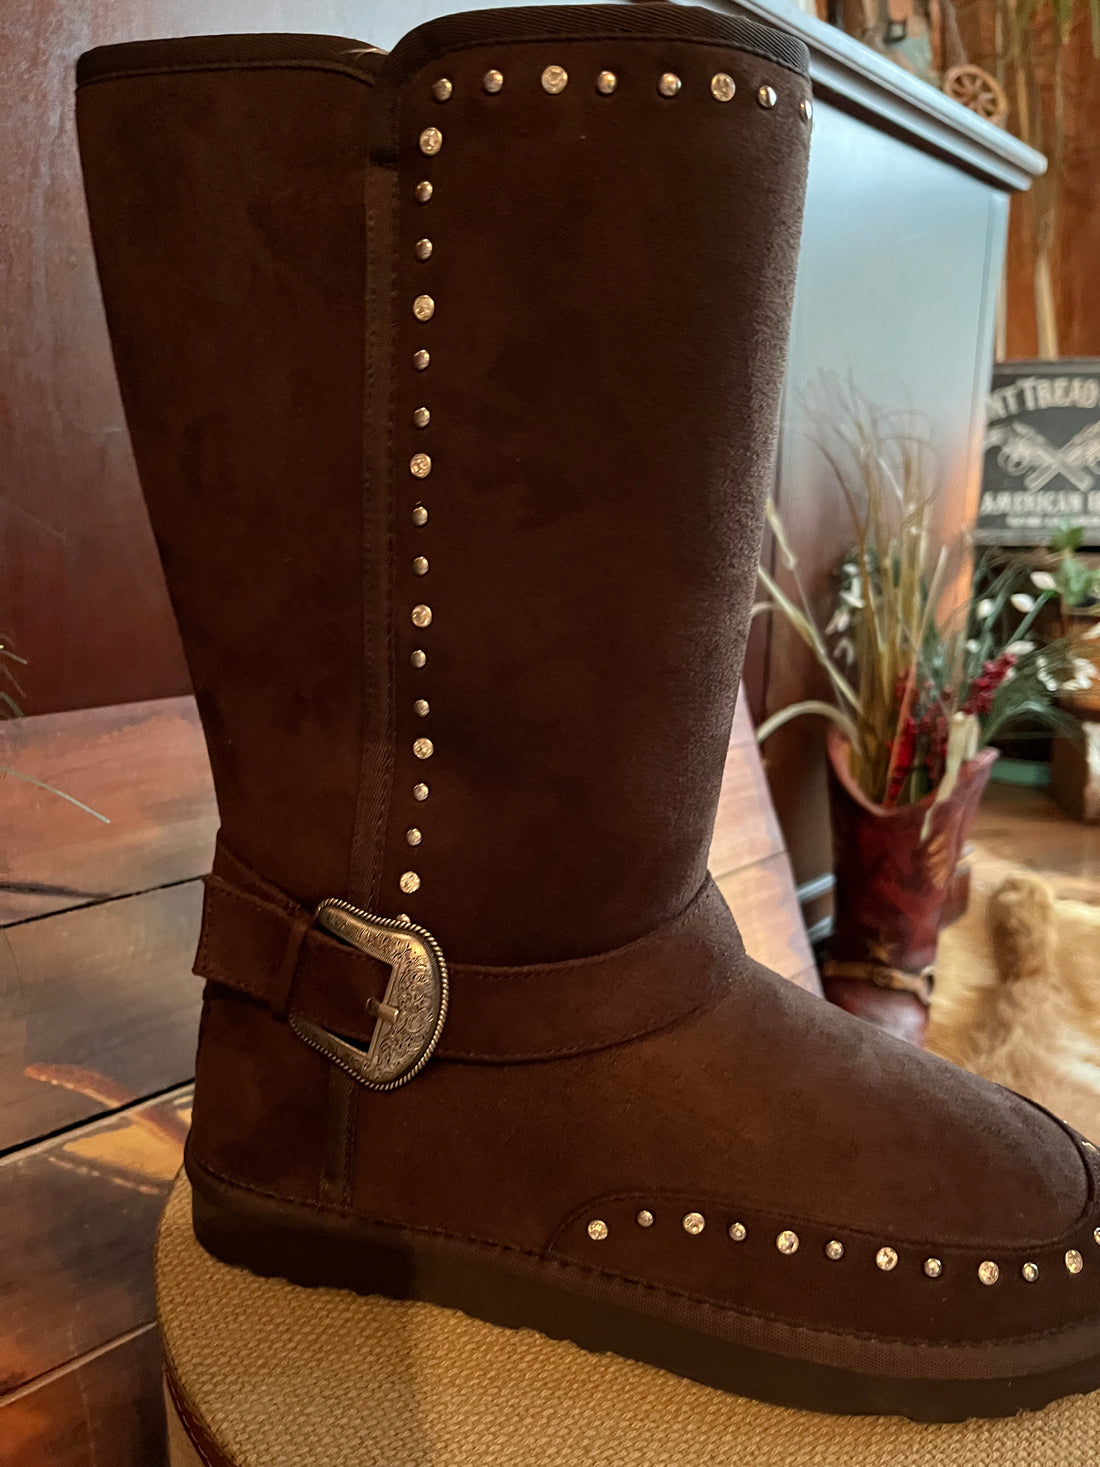 Side View-Montana West Mid Calf Dark Brown Fur Lined Boots w/Rhinestones and Buckle